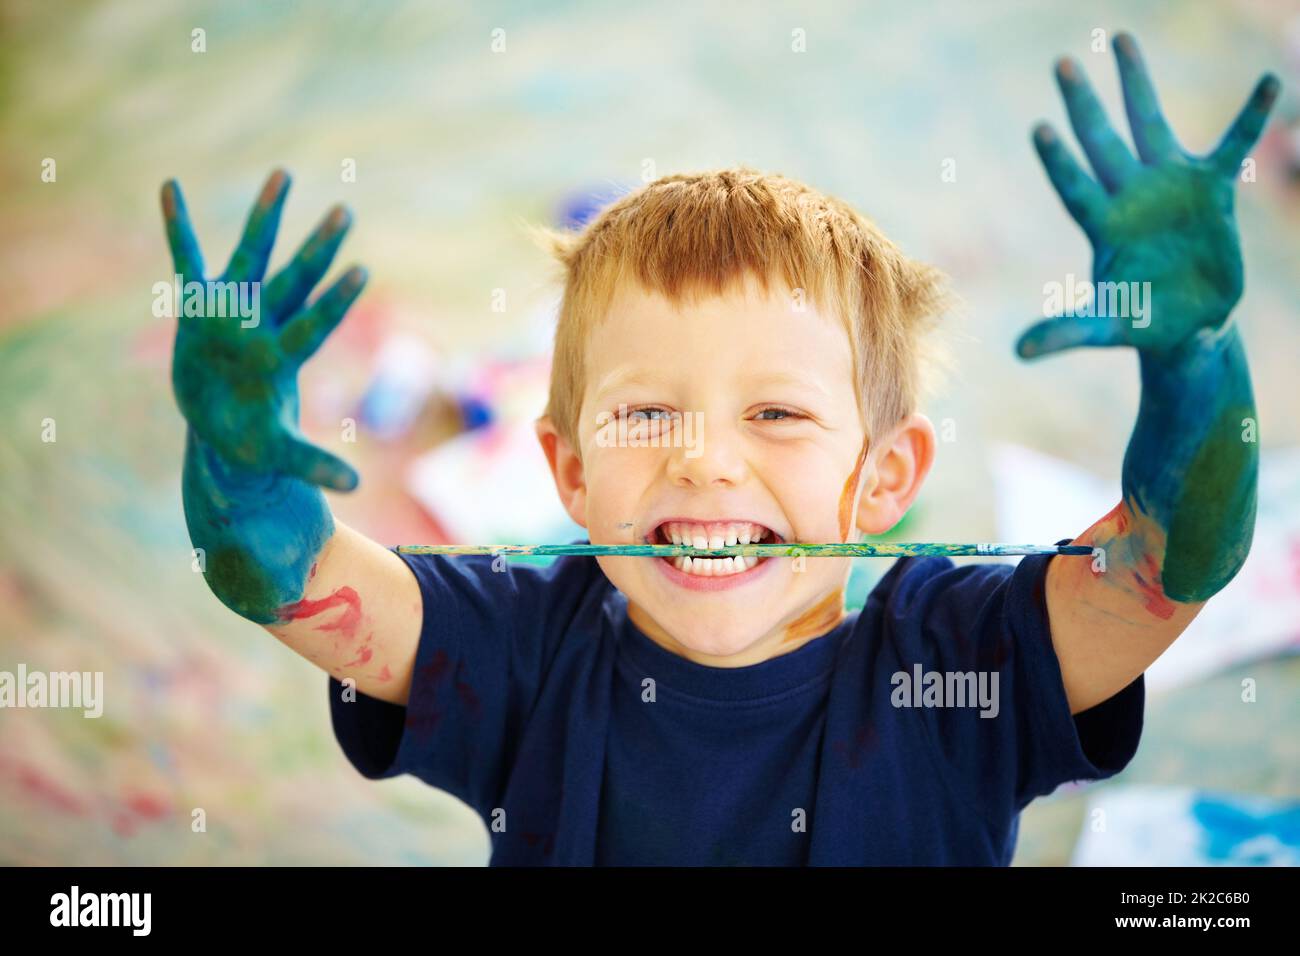 Messy little artist. A little boy covered in paint. Stock Photo